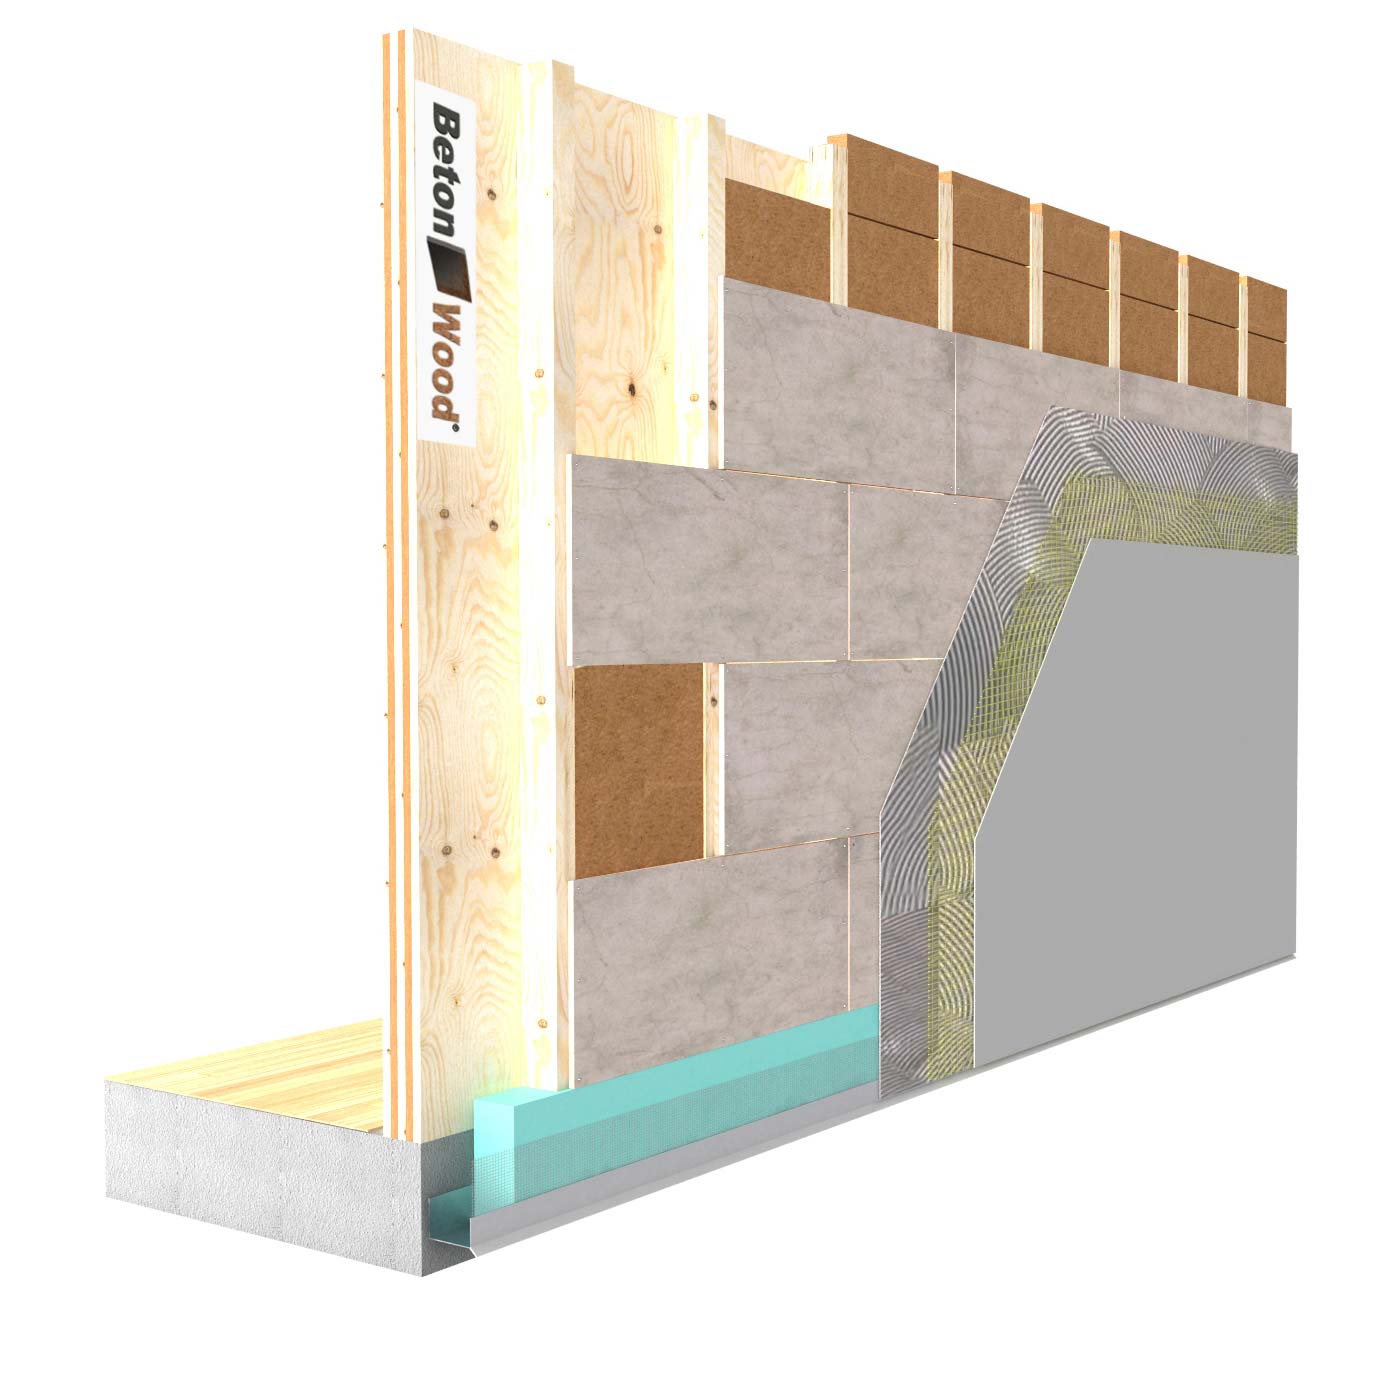 External insulation system with Protect wood fiber on wooden walls